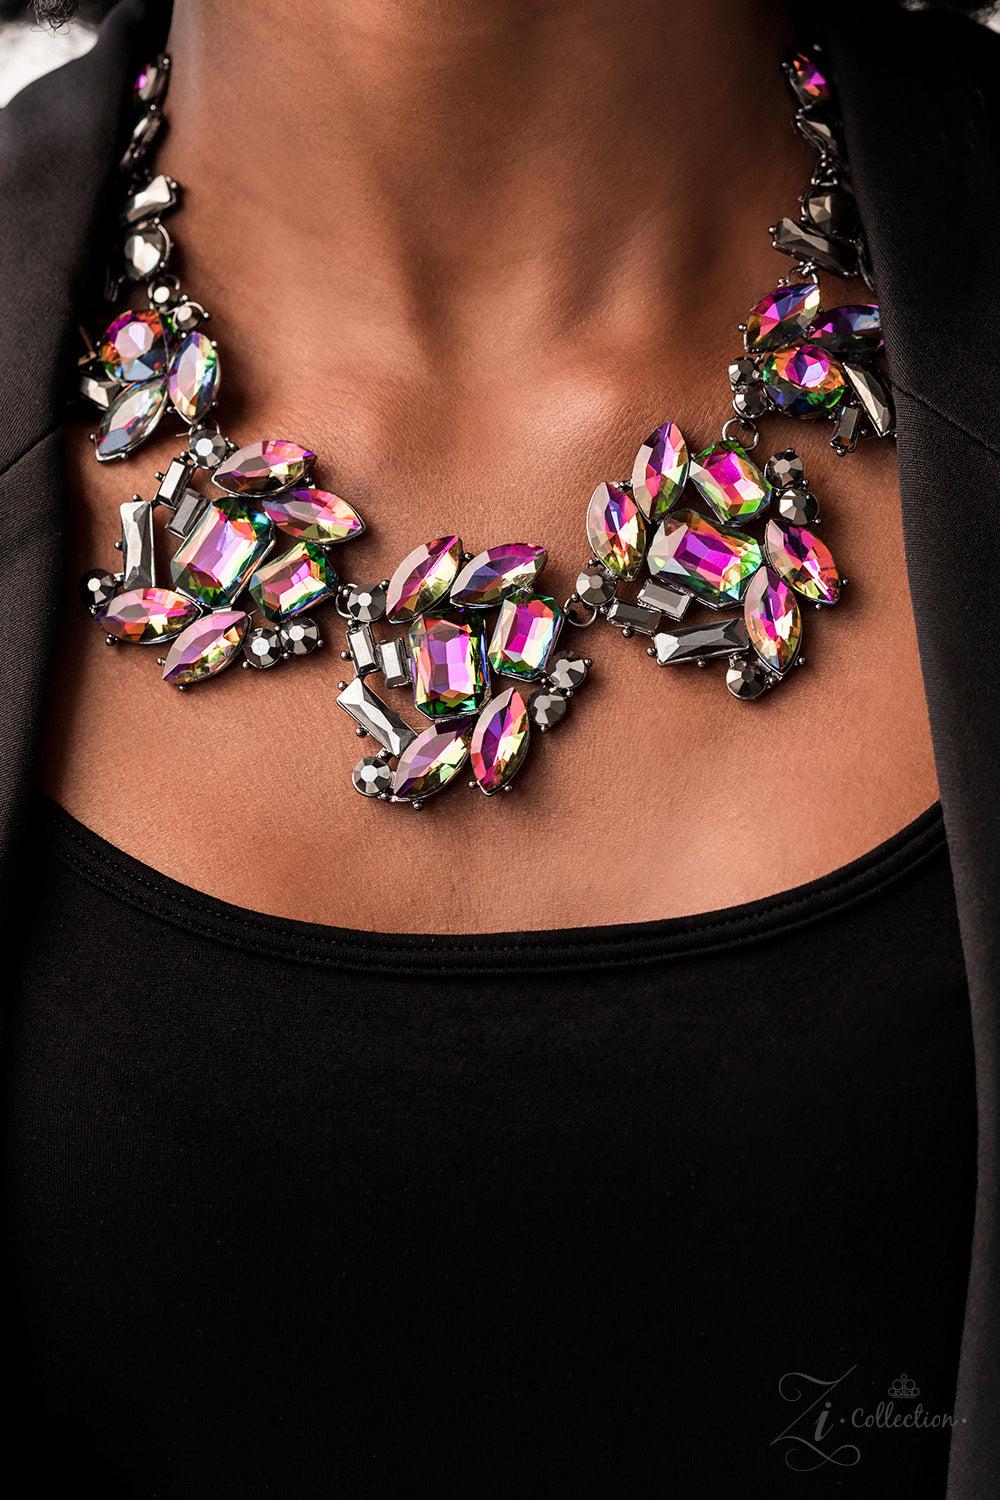 Obsessed 2022 Zi Collection Necklace - Paparazzi Accessories-on model - CarasShop.com - $5 Jewelry by Cara Jewels